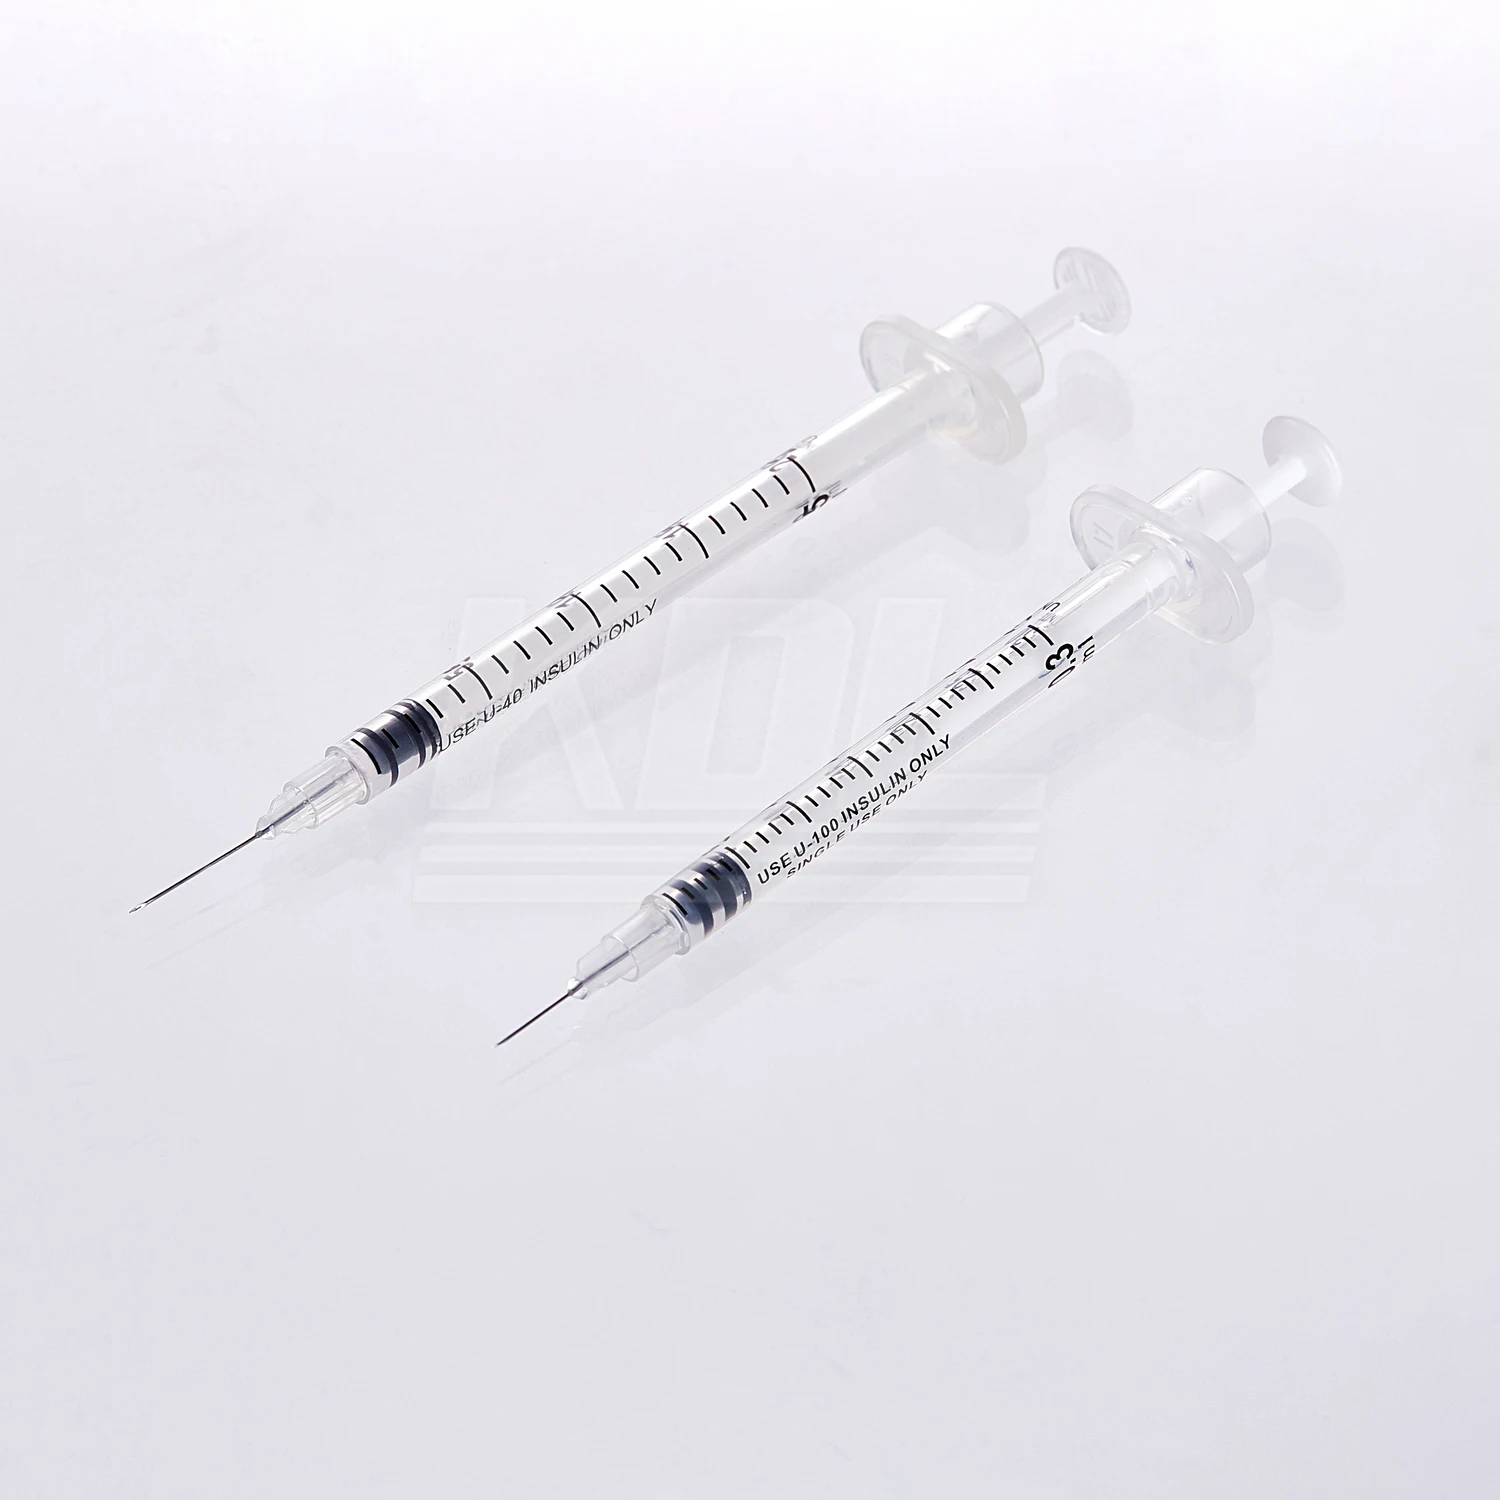 Kdl Wholesale Disposable Insulin Syringe With Fixed Needle 0 3ml 0 5ml 1ml Insulin Syringes For Single Use Buy Syringe For Insulin Insulin Syringe 1ml Syringe Product On Alibaba Com